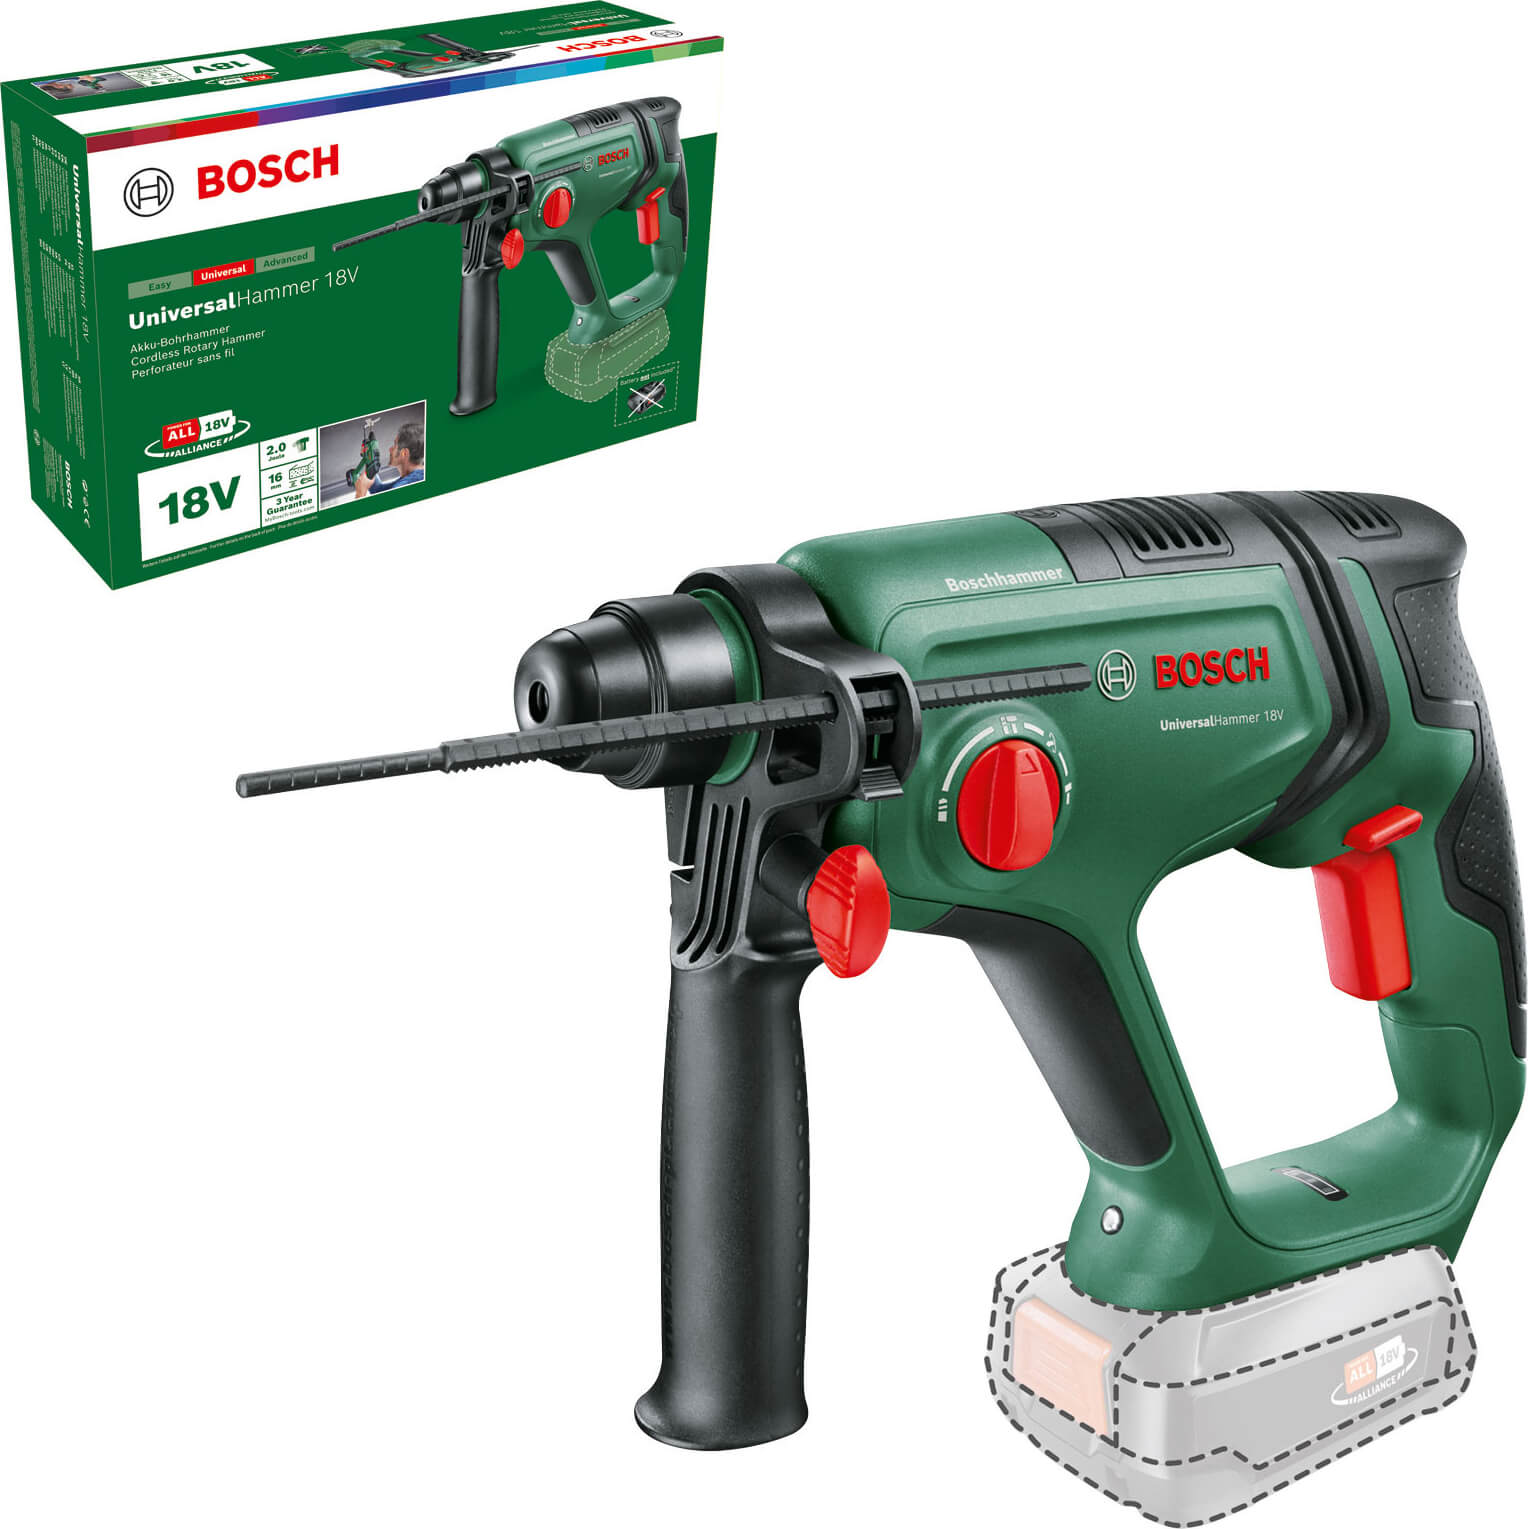 Bosch UNIVERSALHAMMER P4A 18v Cordless SDS Drill No Batteries No Charger No Case